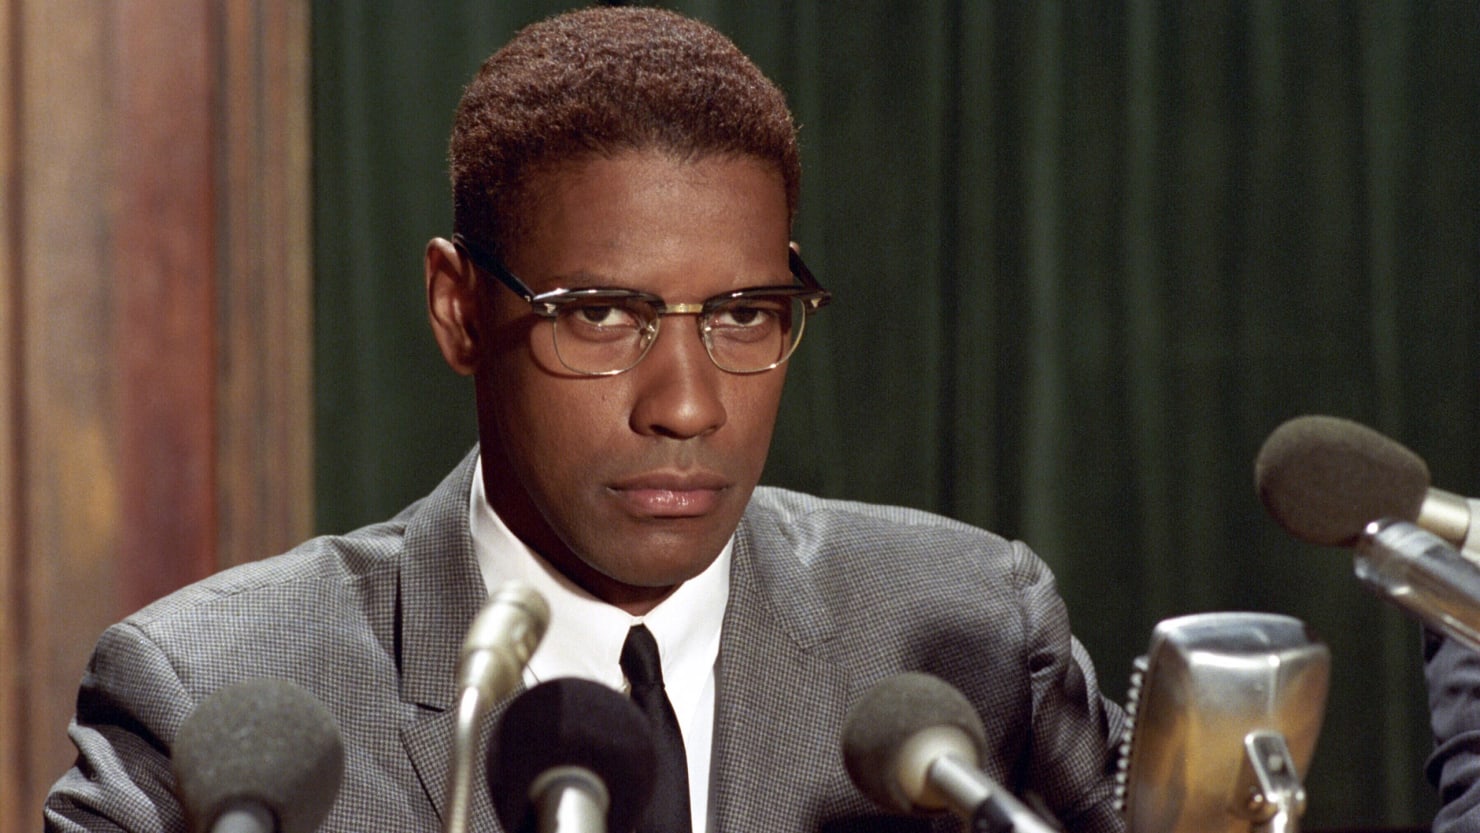 Photo still of Denzel Washington portraying Malcolm X sitting in front of a cluster of microphones